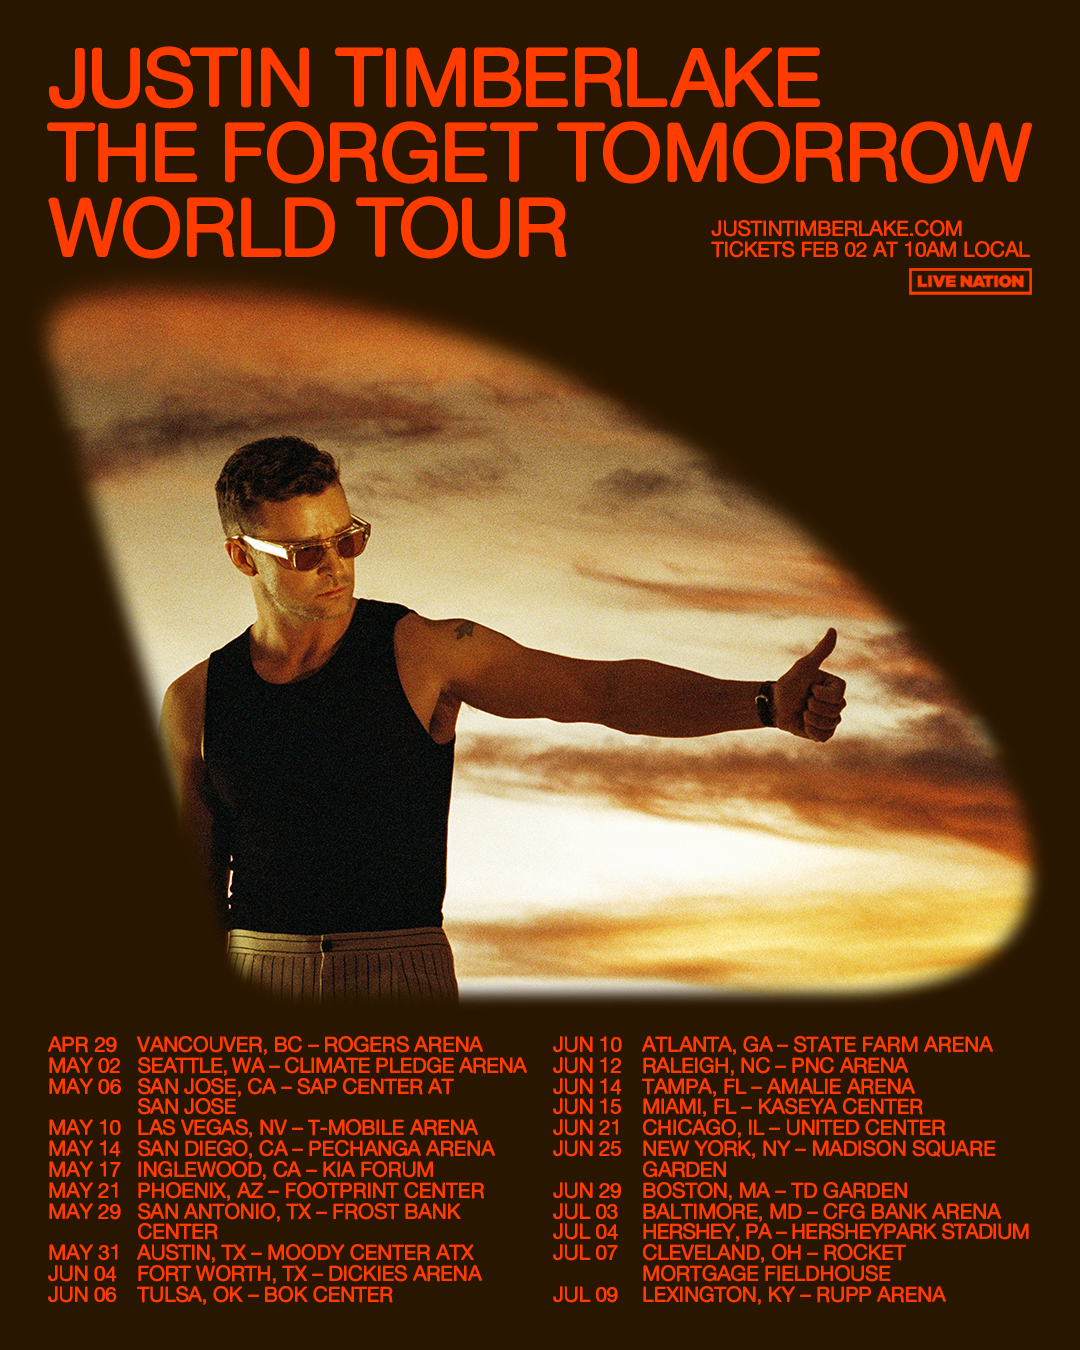 Justin Timberlake - The Forget Tomorrow World Tour at Amalie Arena Tickets